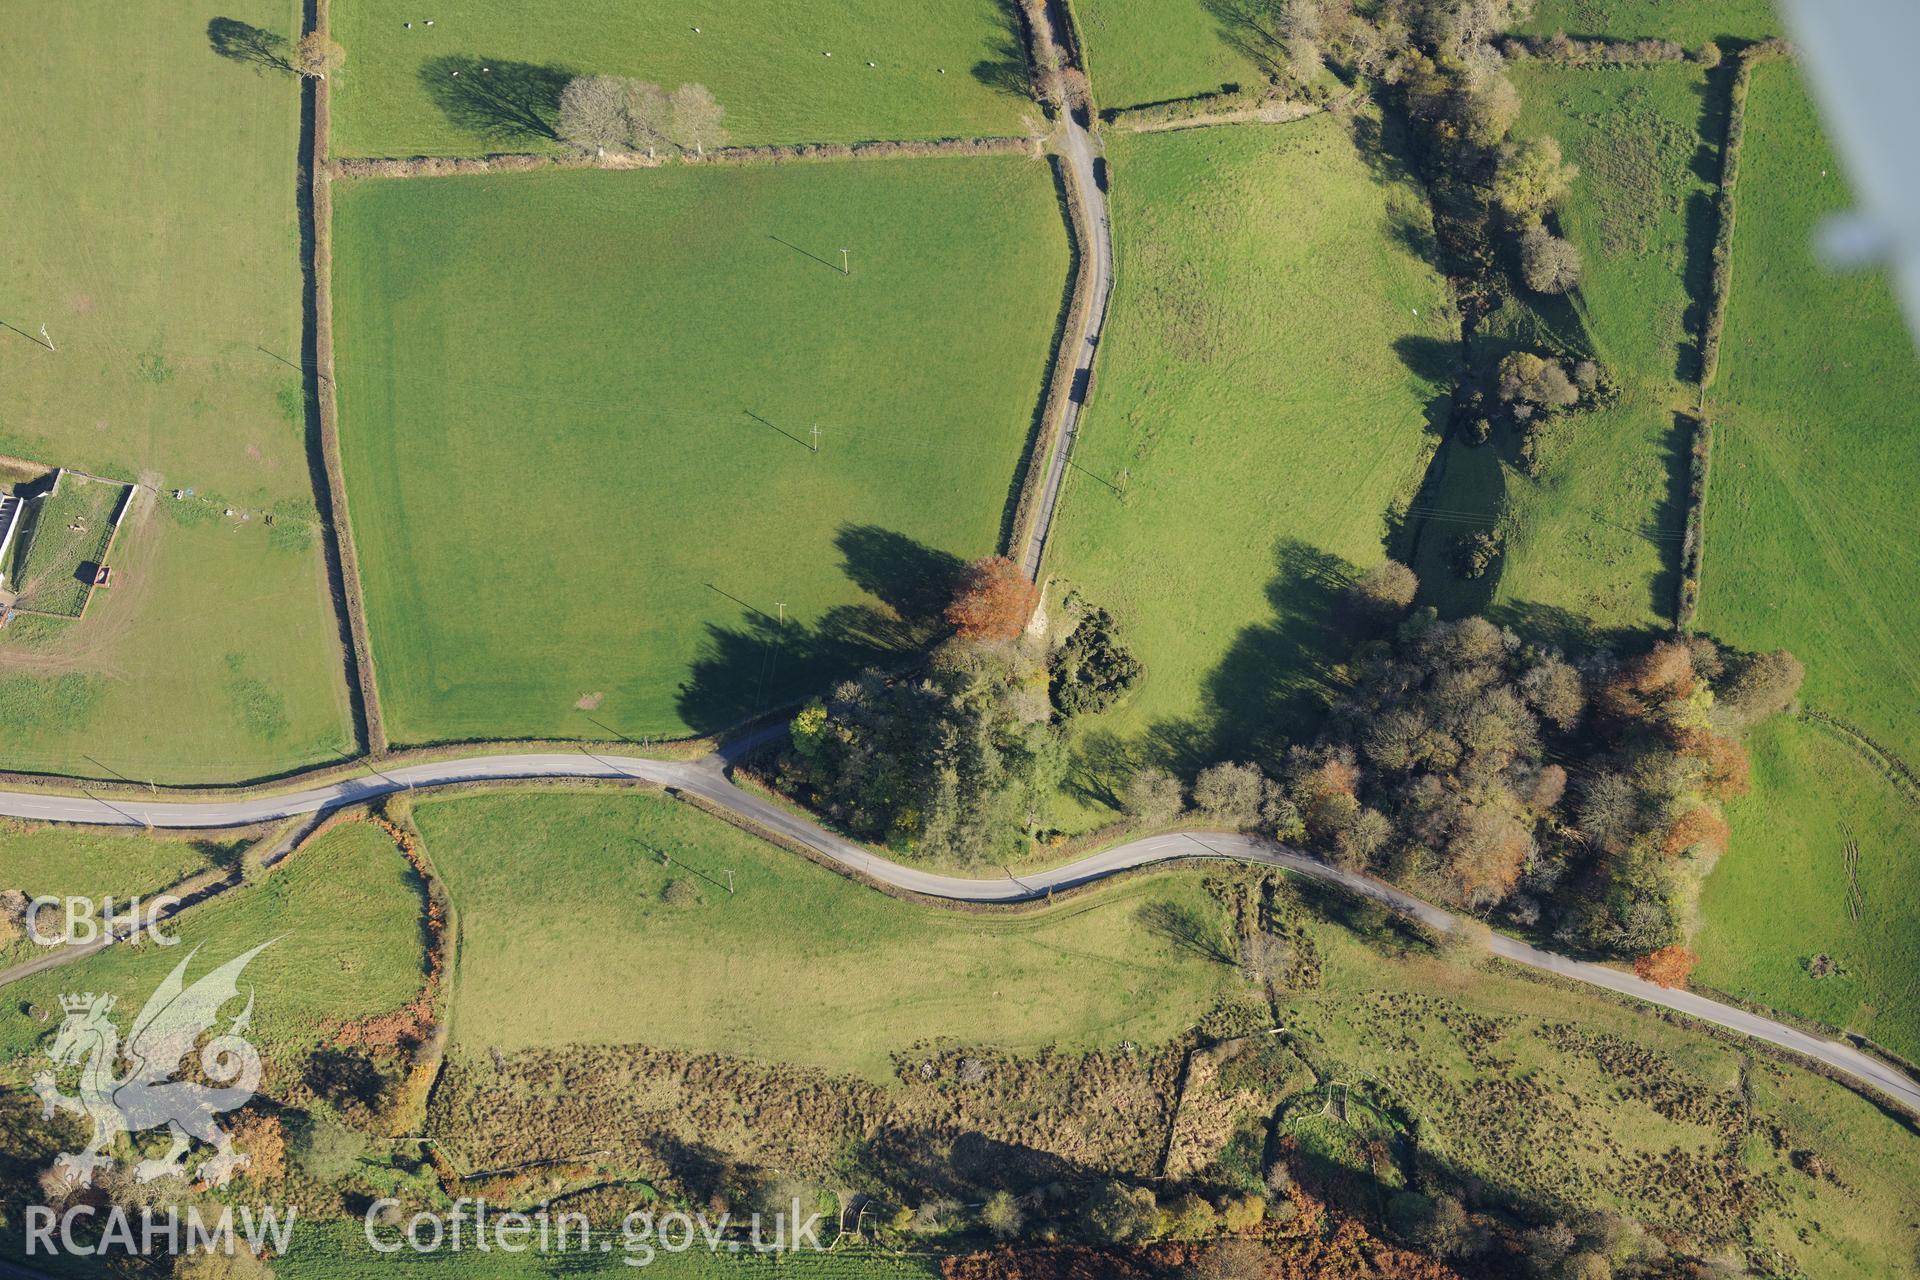 Farmland and buildings associated with Castell Howell farm, near Lampeter. Oblique aerial photograph taken during the Royal Commission's programme of archaeological aerial reconnaissance by Toby Driver on 2nd November 2015.